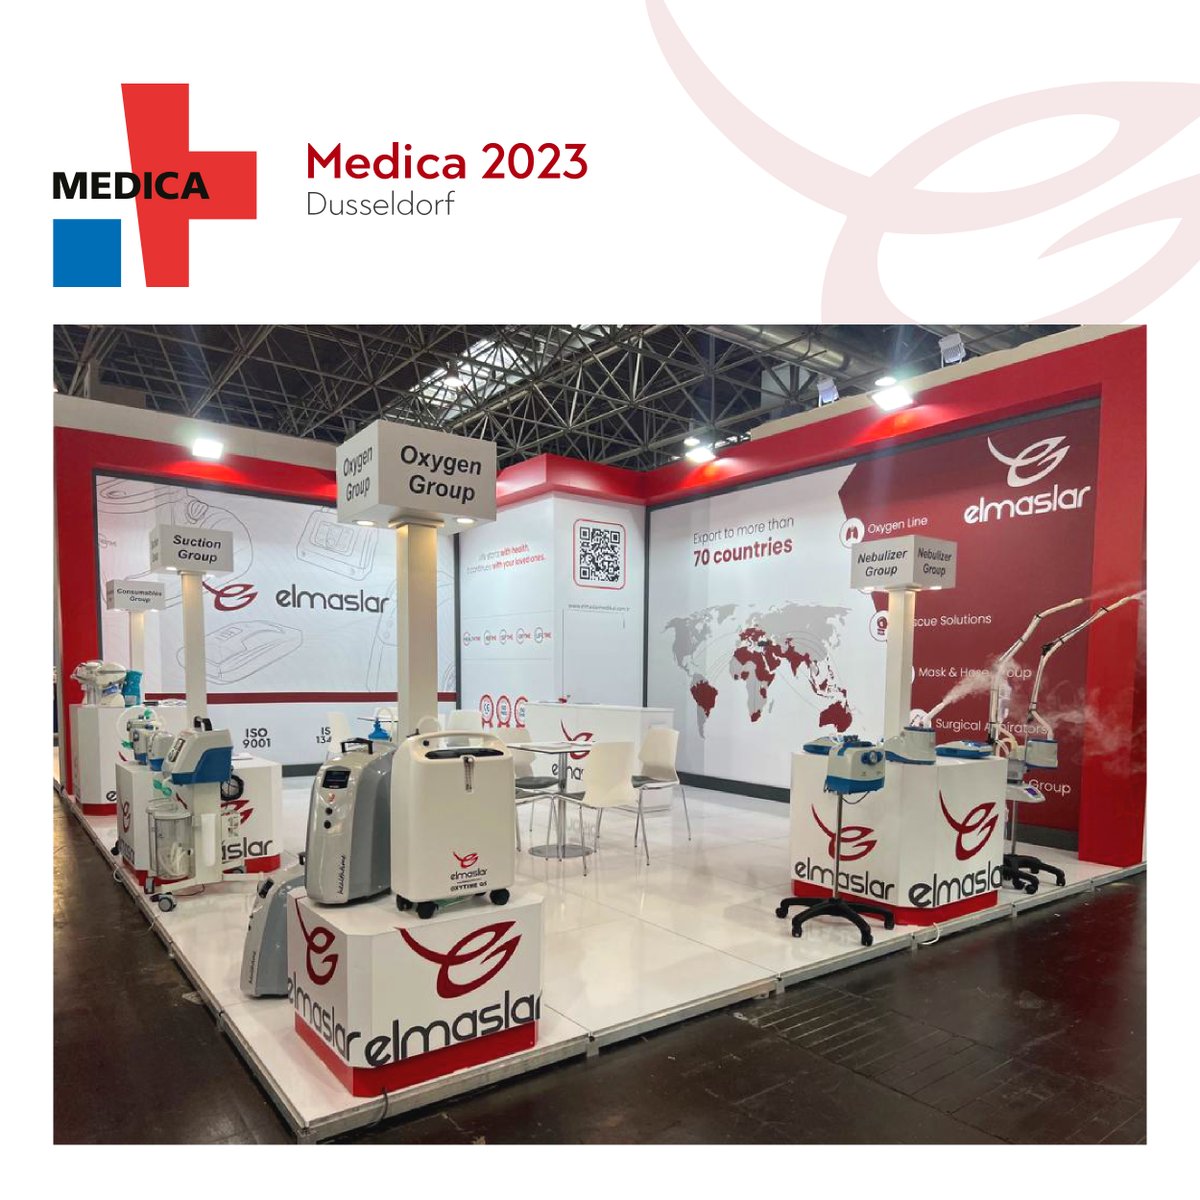 We met with you at the 2023 Medica Fair in Dusseldorf/Germany. We would like to thank all our guests wholeheartedly.

#elmaslar #medica #medica2023 #dusseldorf #germany #fair